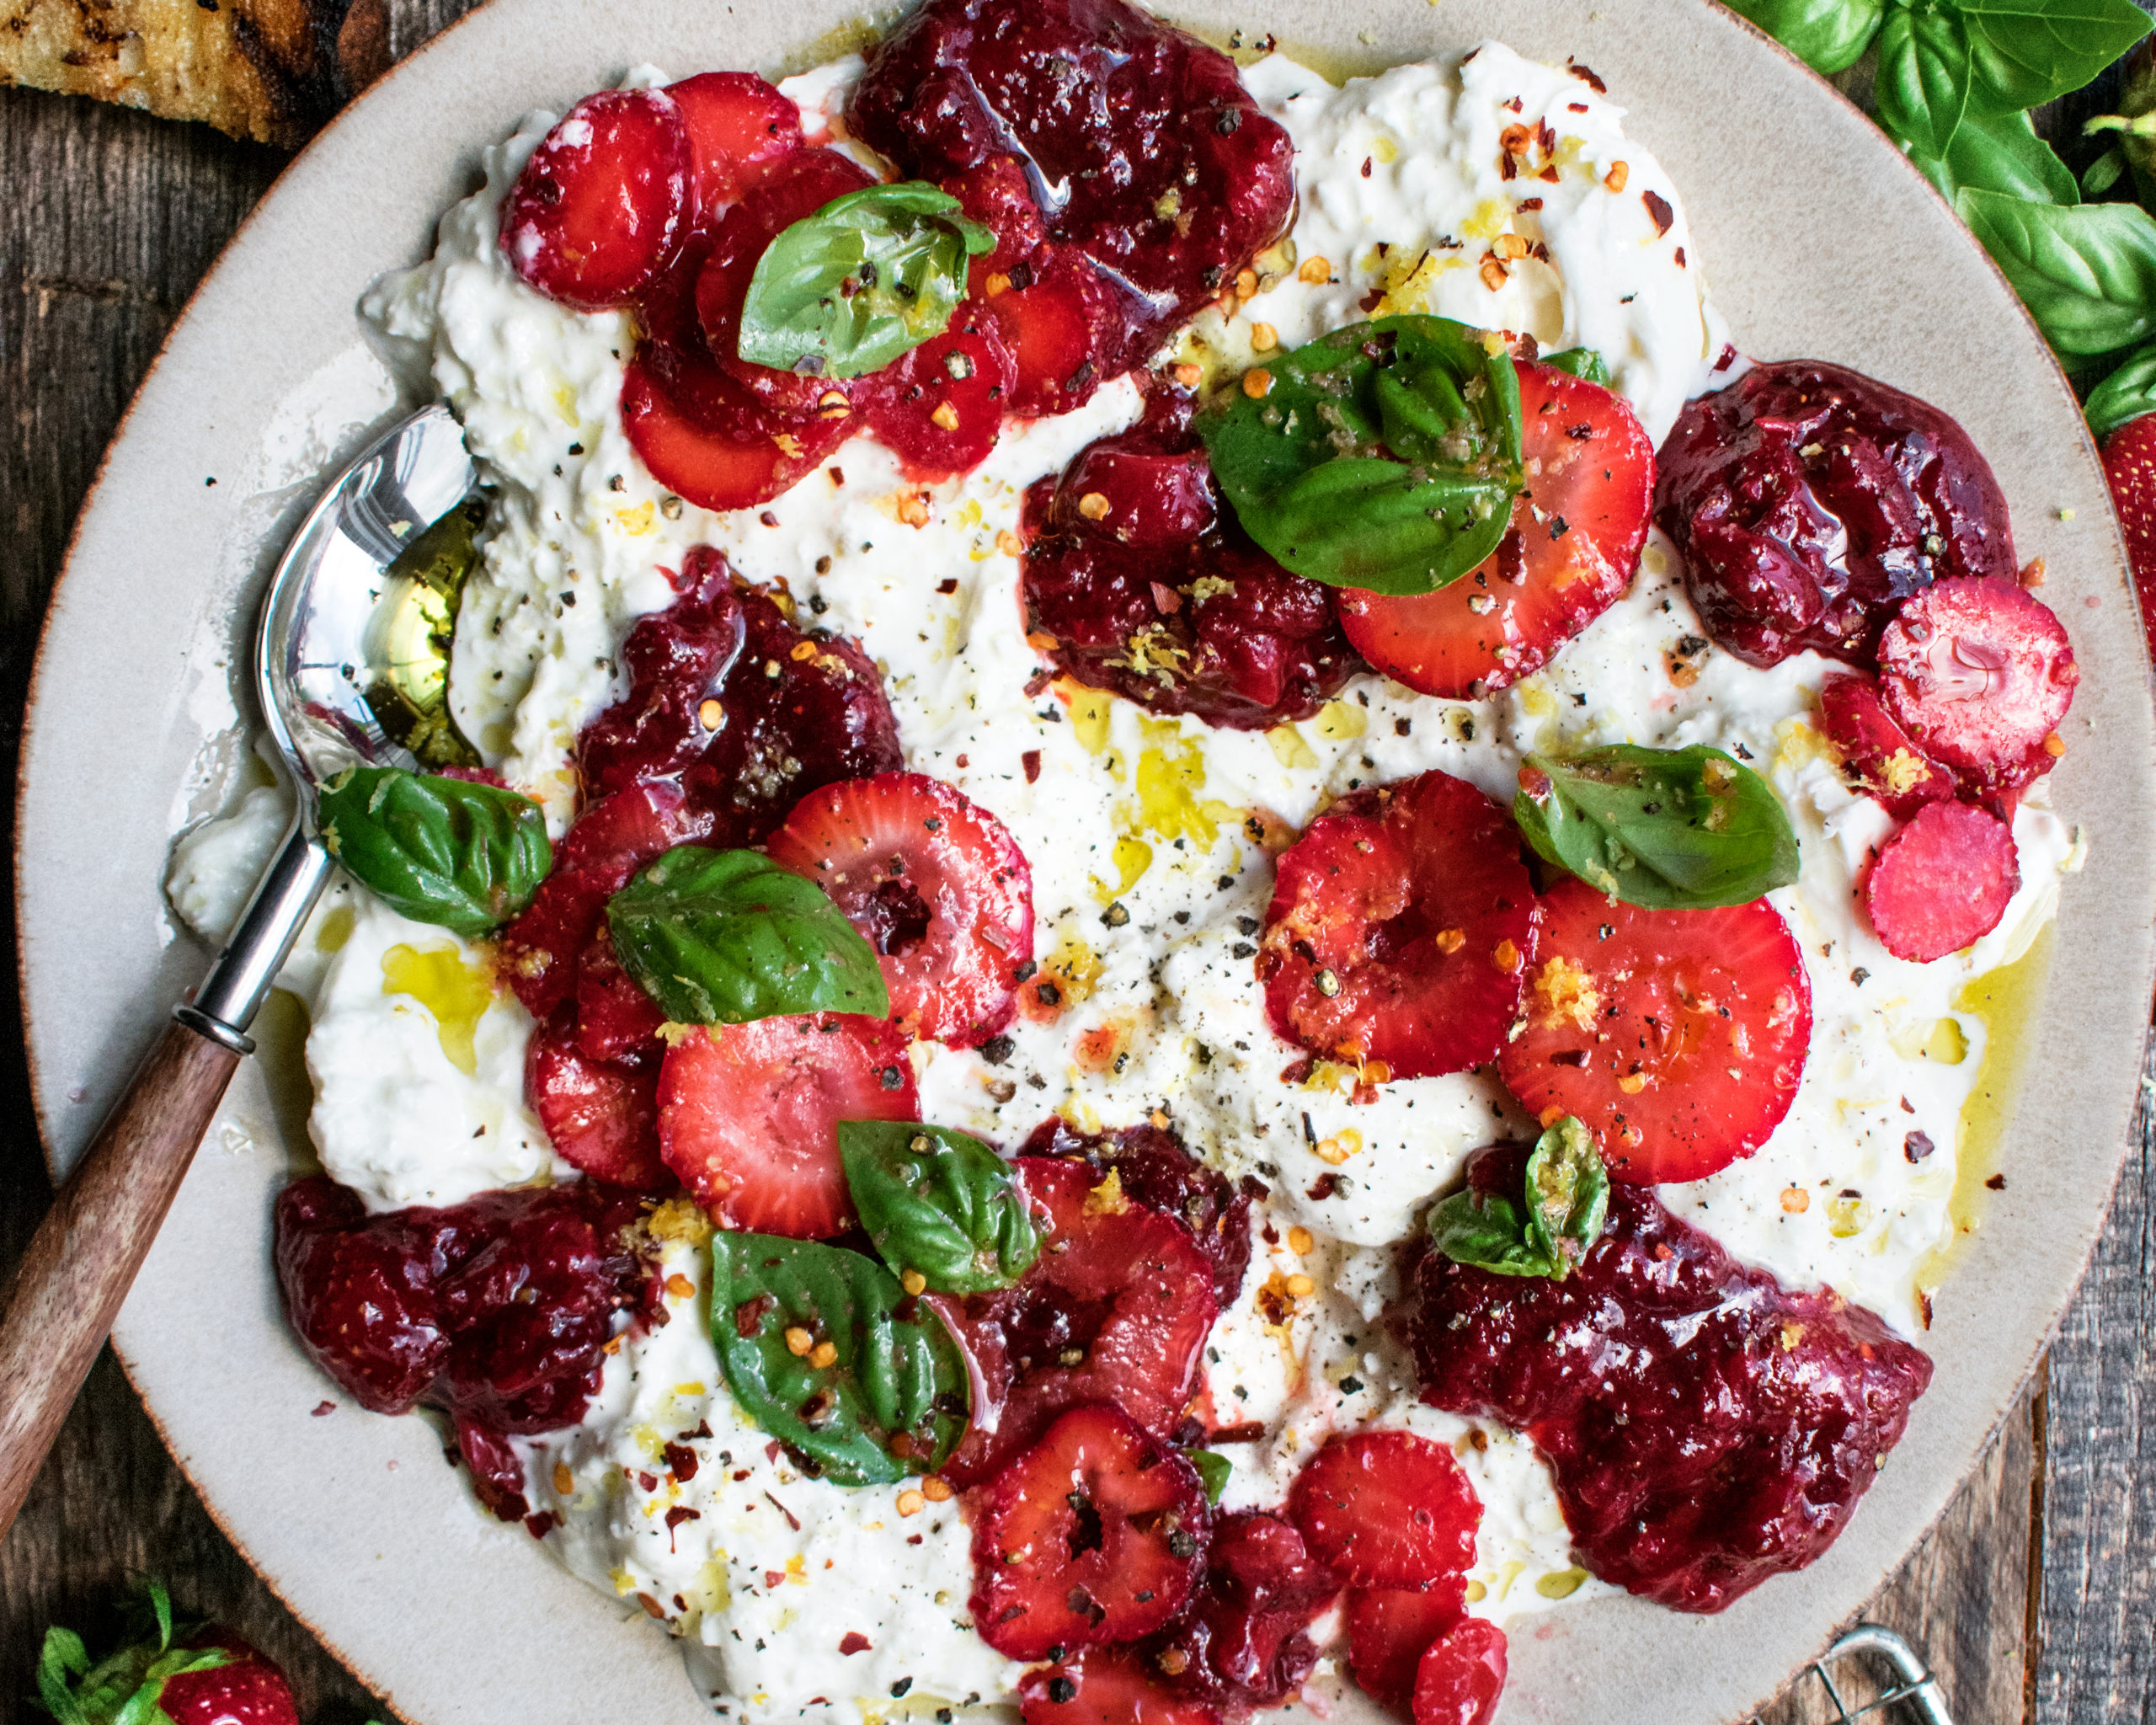 Burrata with Balsamic Tomatoes (So Flavorful!) - Spend With Pennies